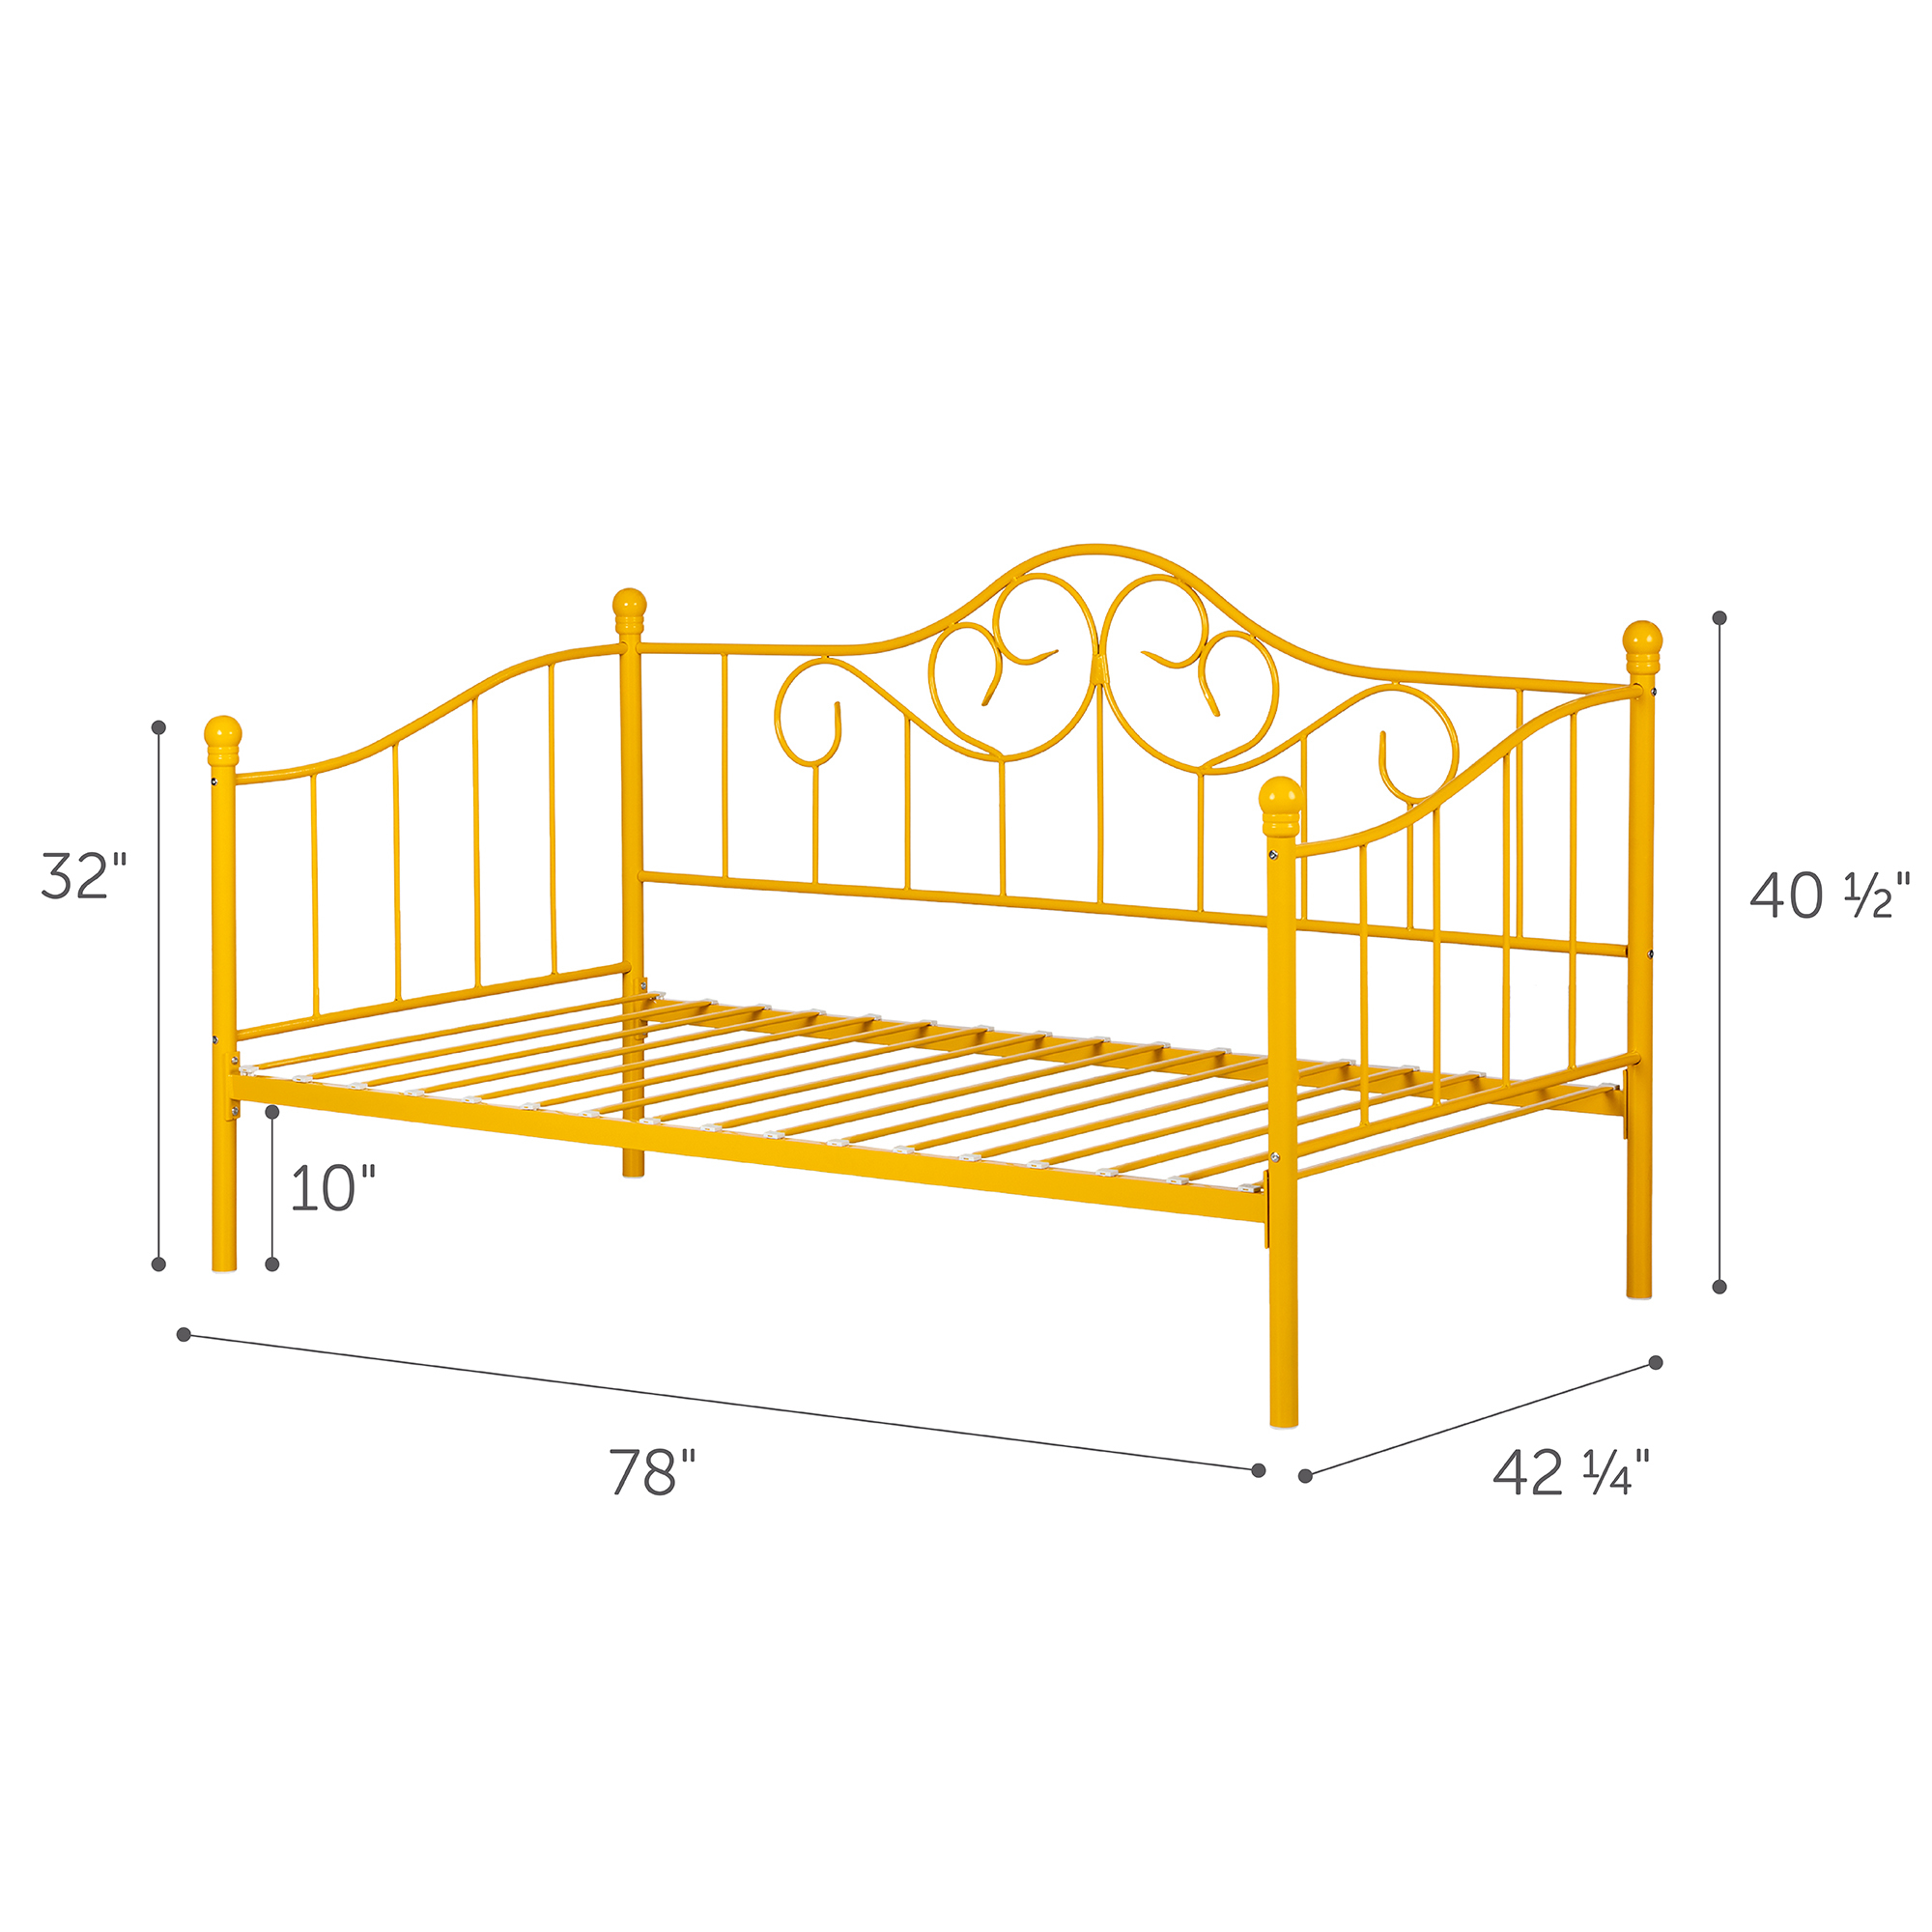 South Shore Balka Metal Twin Daybed with Metal Slats, Yellow - image 5 of 11